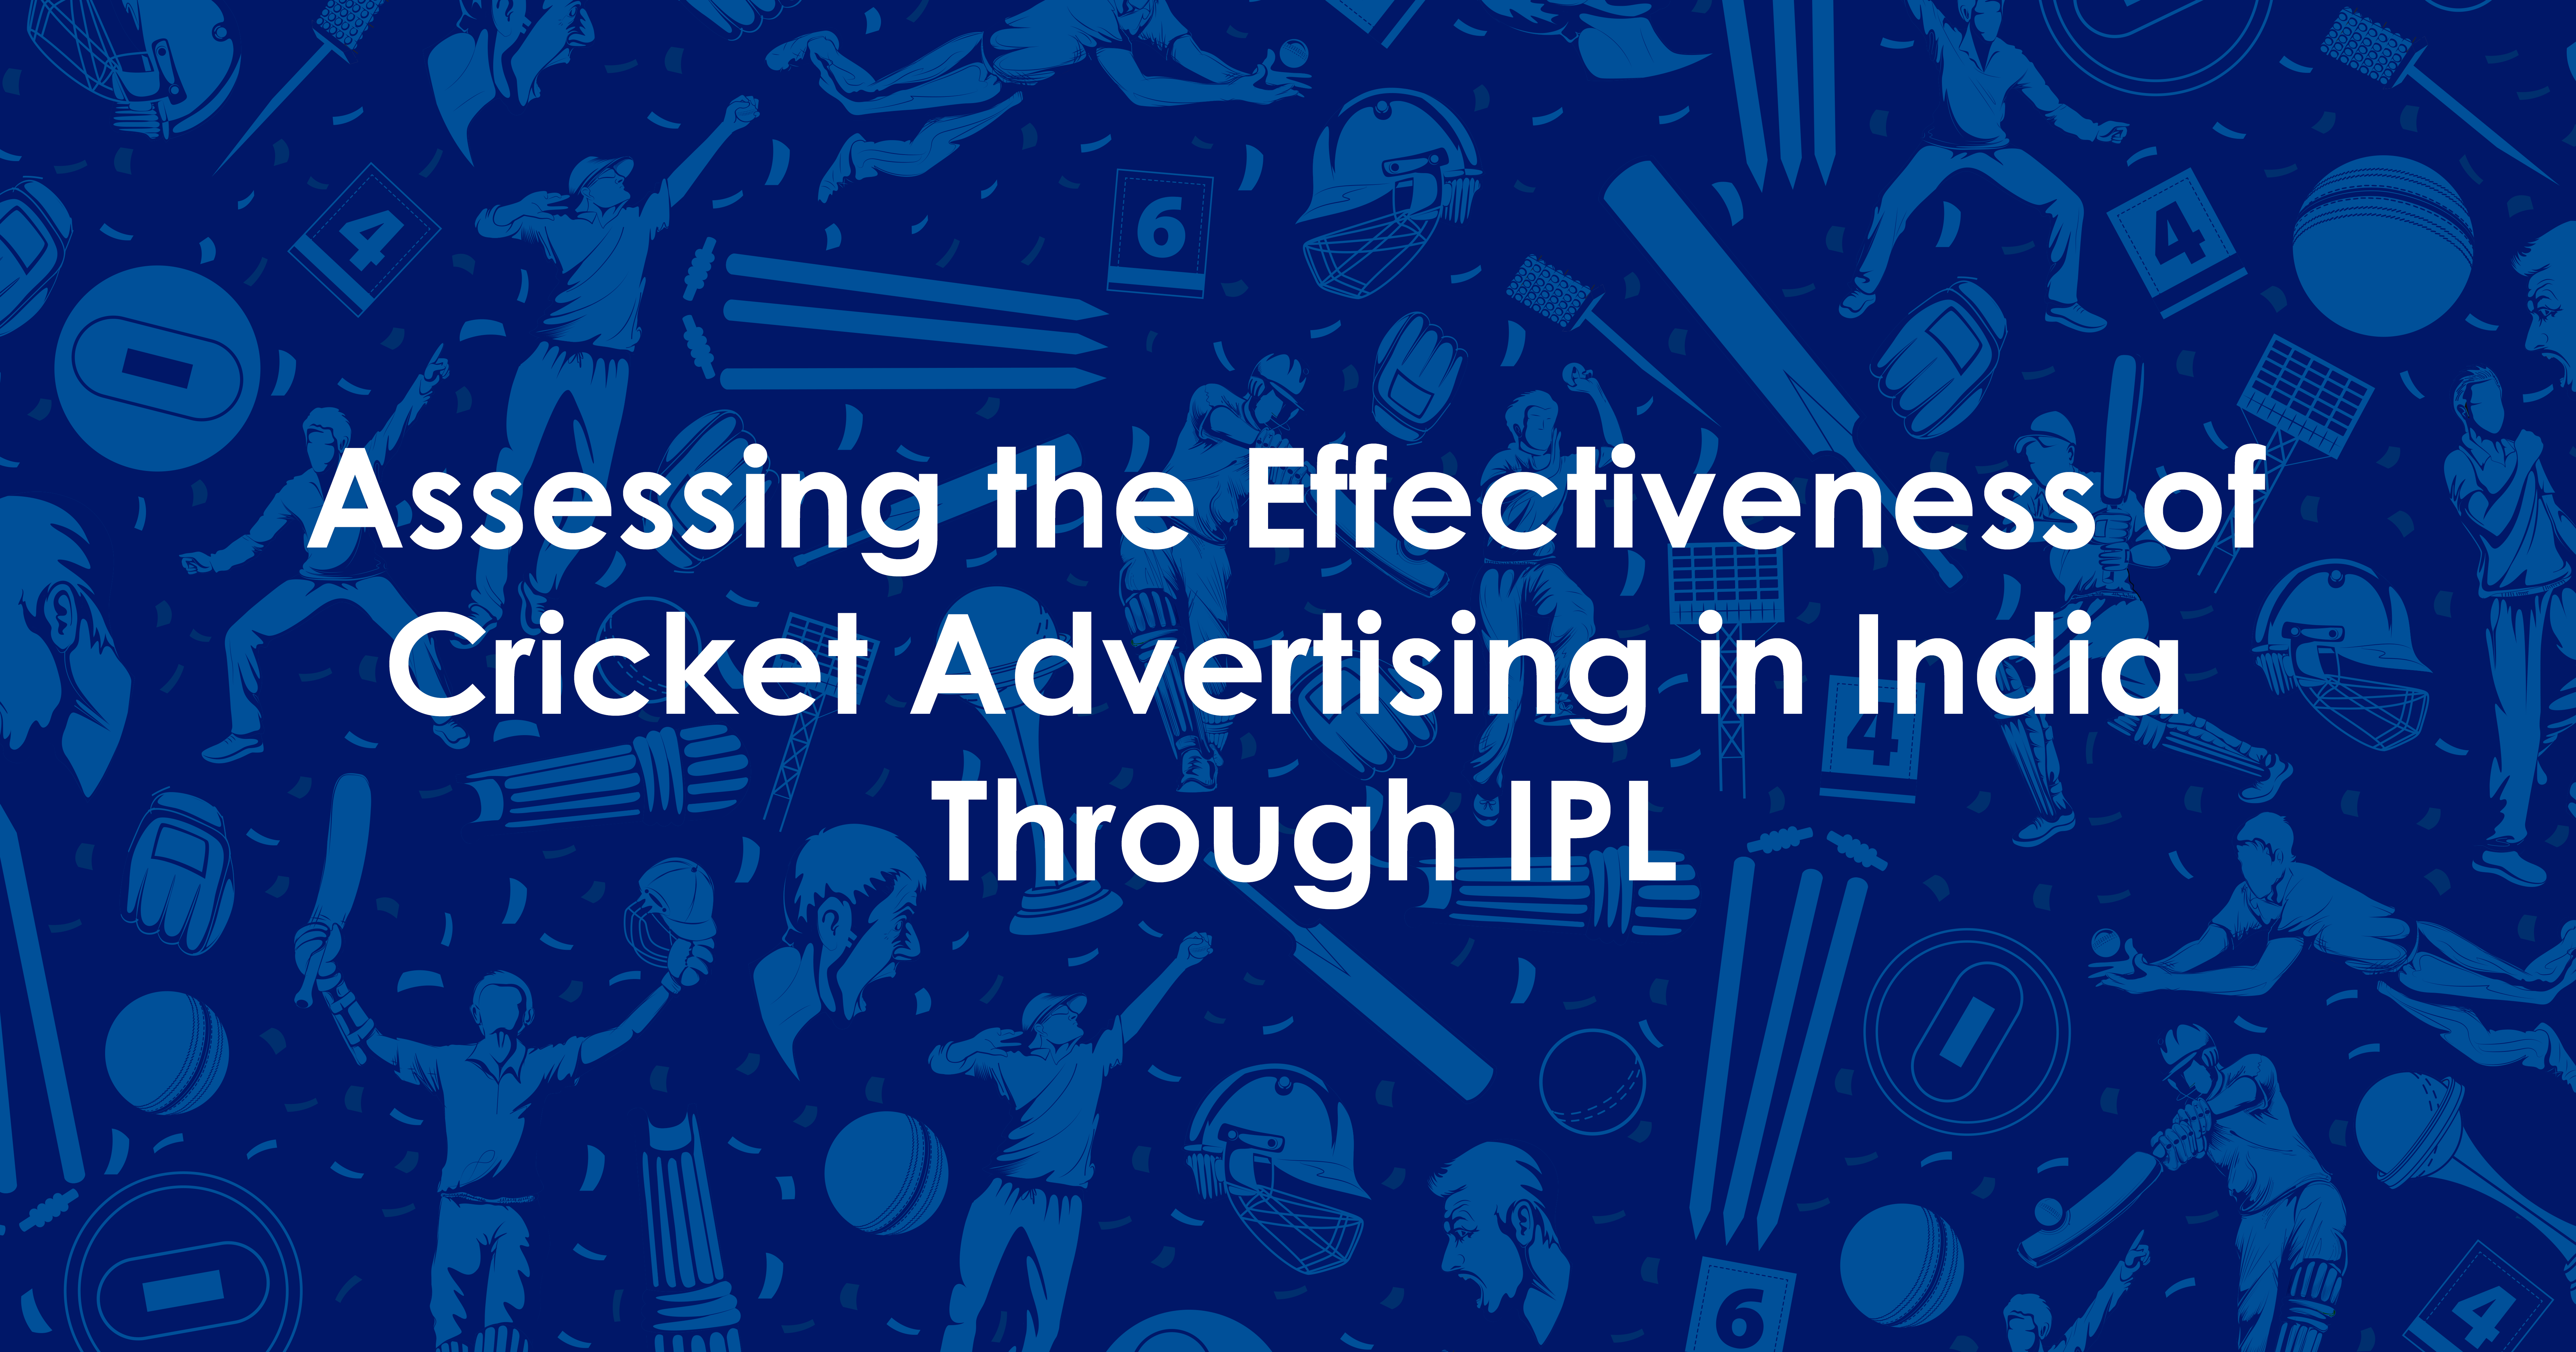 Assessing the Effectiveness of Cricket Advertising in India through IPL